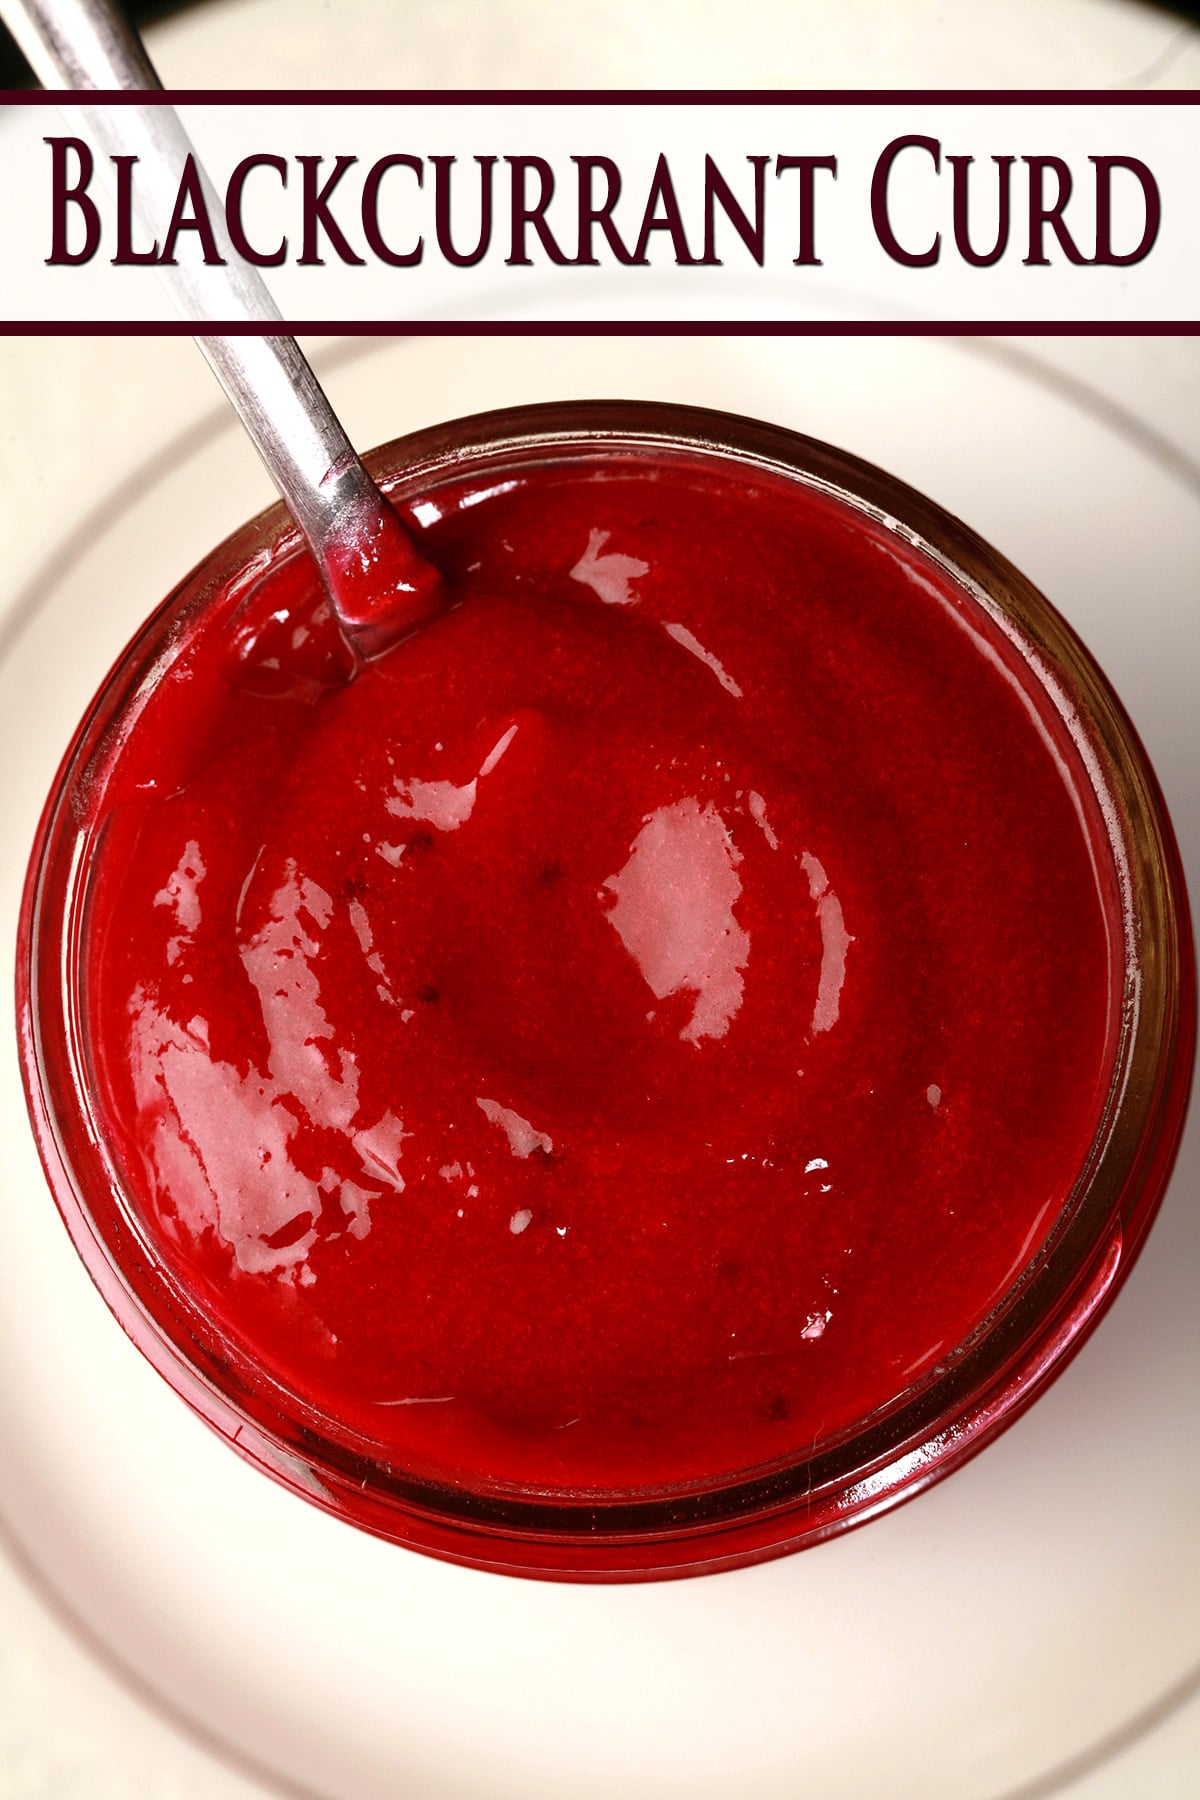 A close up photo of a jar of blackcurrant curd.